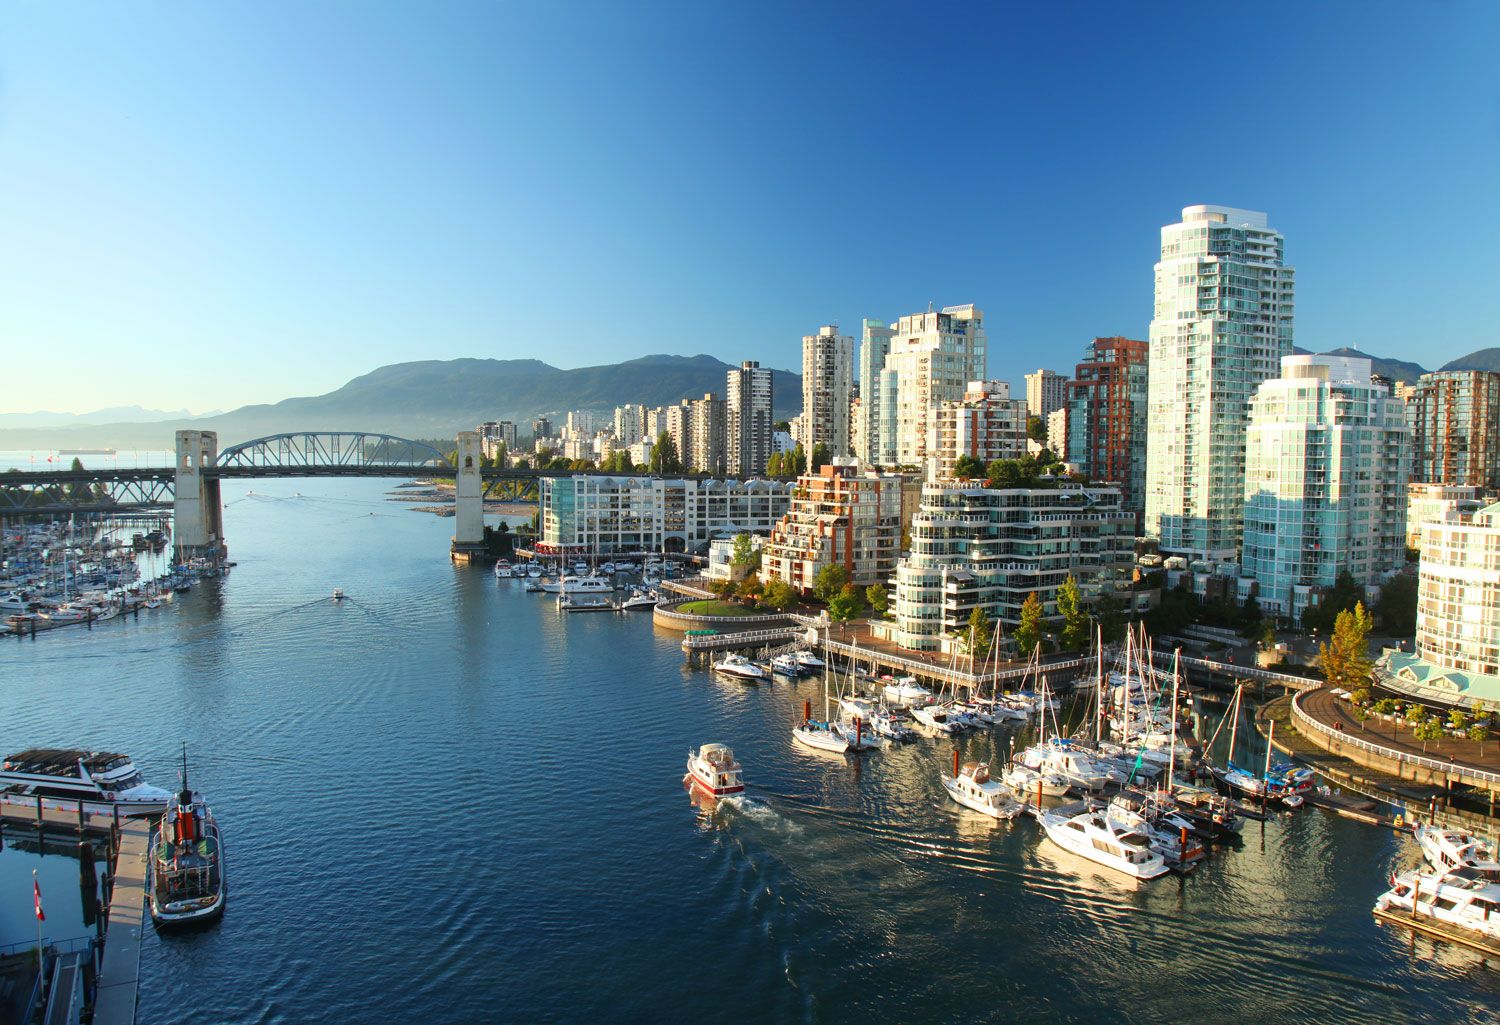 Vancouver: A City of Diverse Landscapes, Fine Cuisine & First Nations